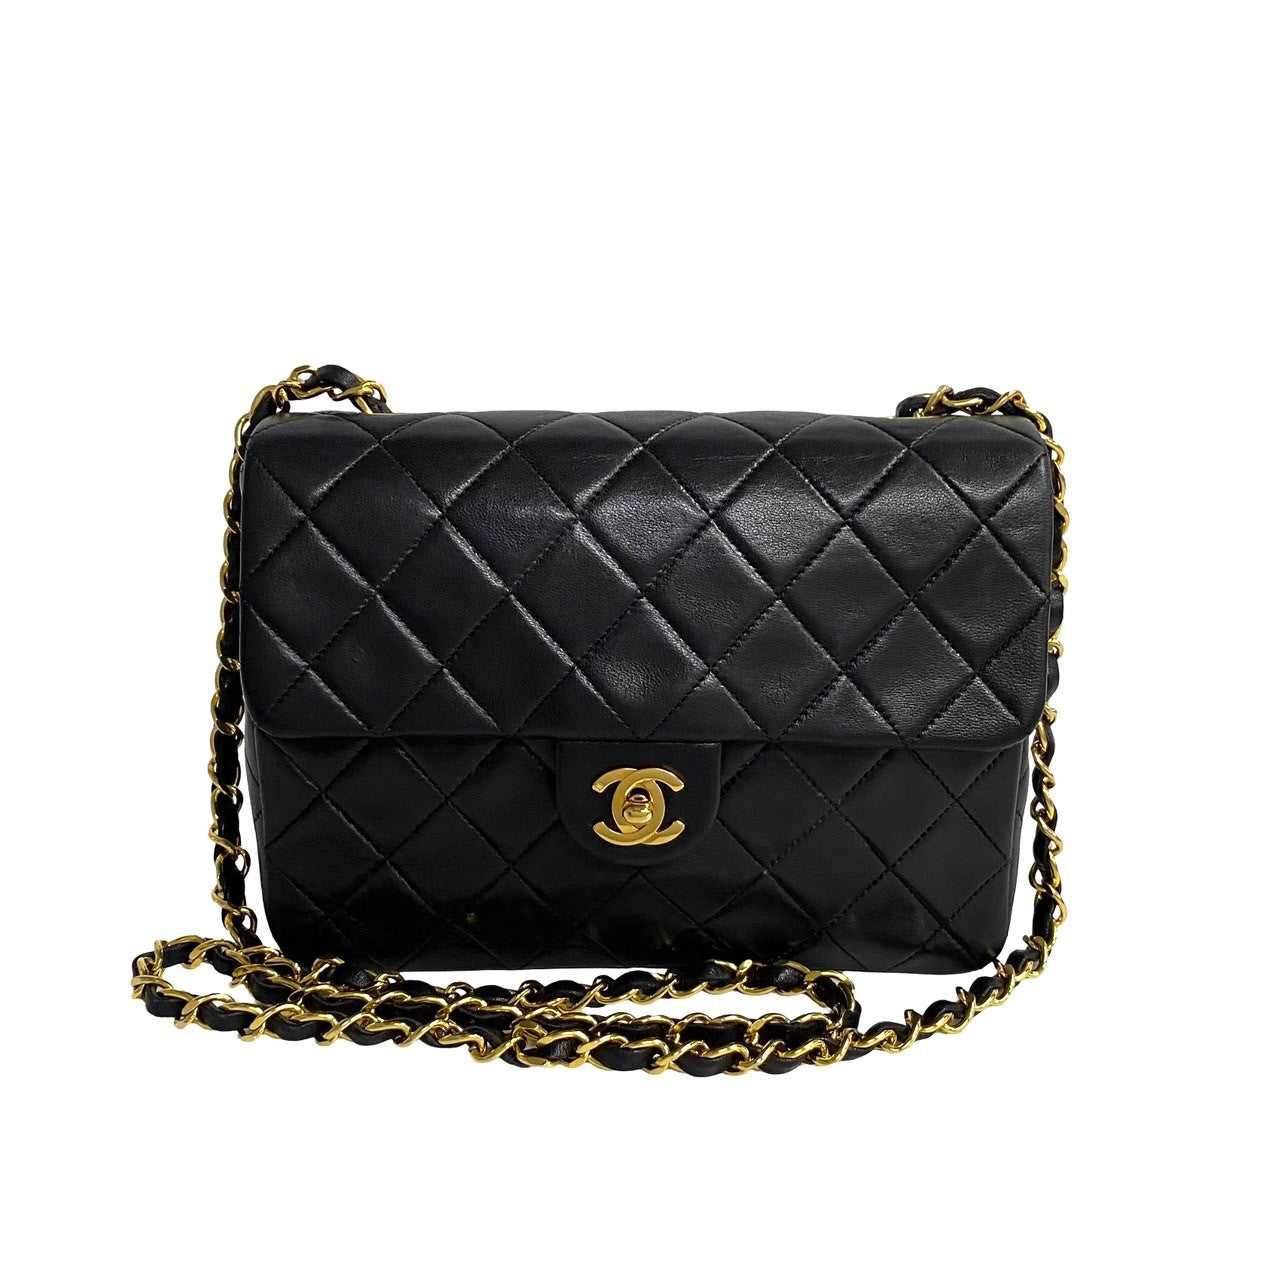 Chanel Classic Mini Single Flap Bag Leather Crossbody Bag in Good condition